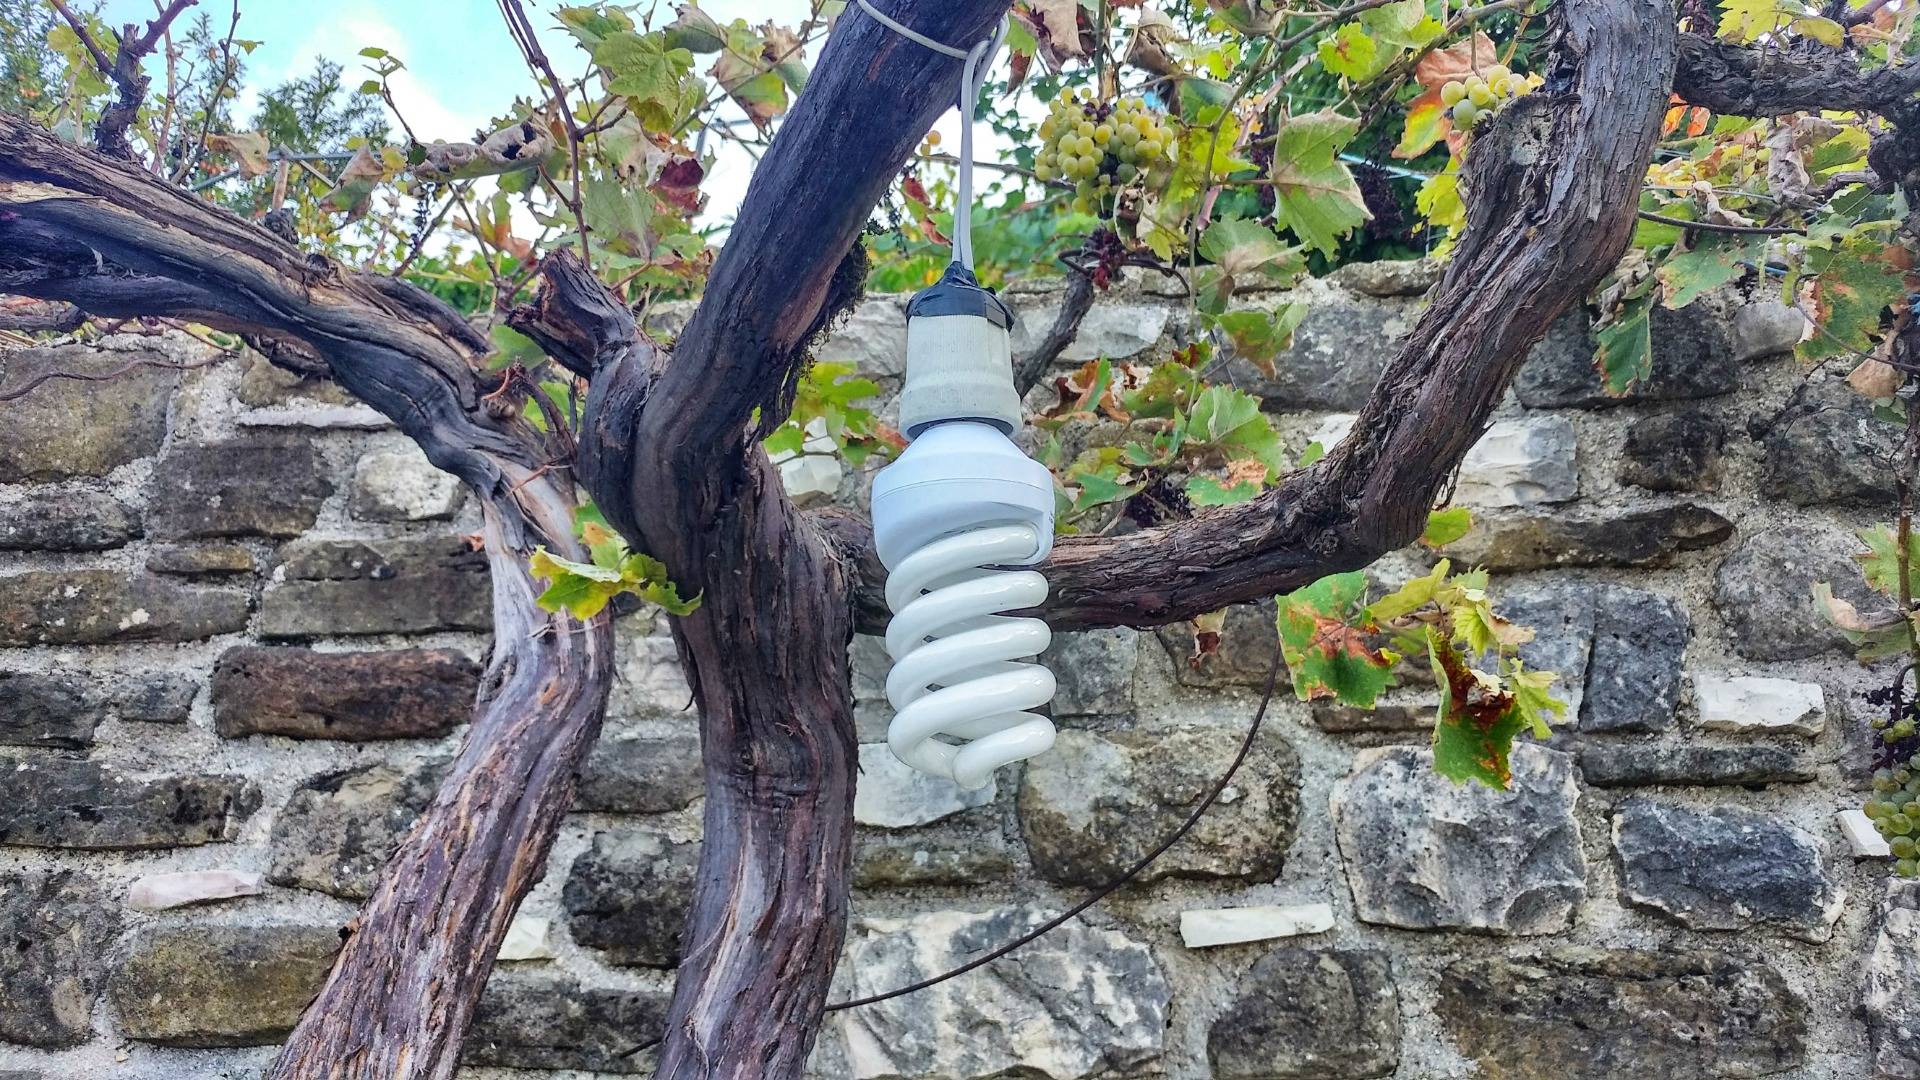 An energy saving lamp, tied to a tree